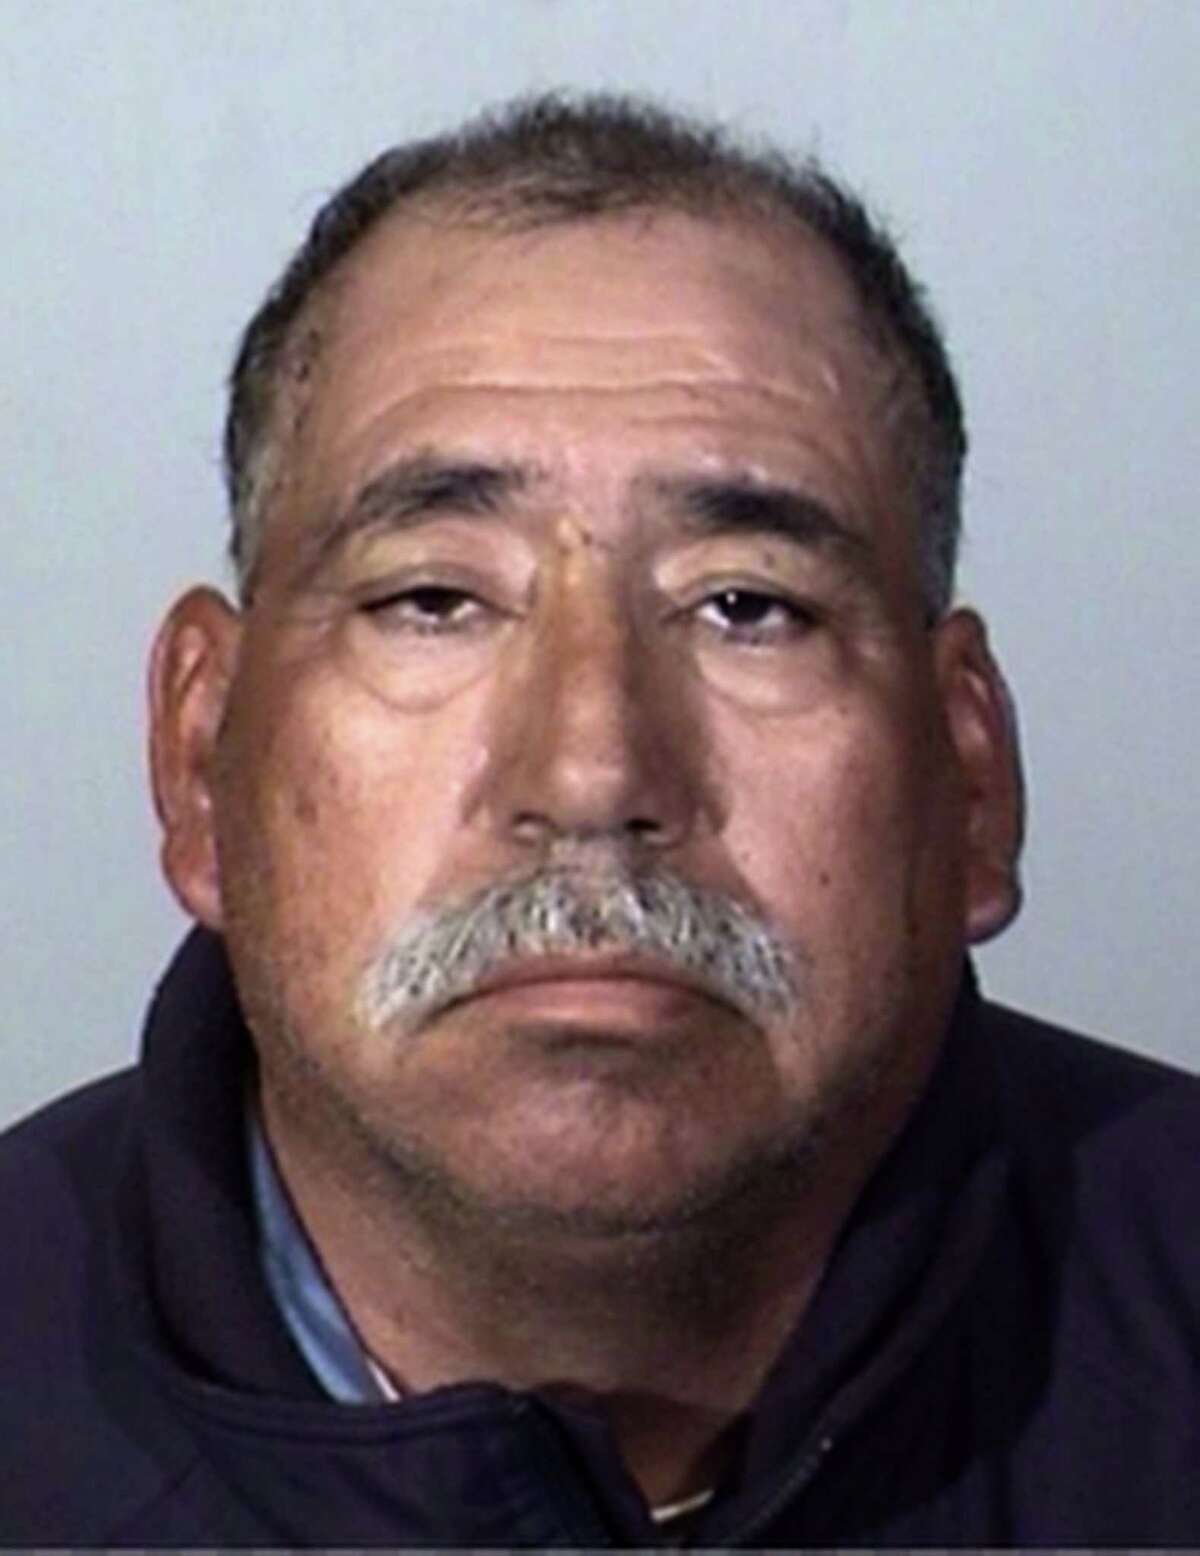 This Tuesday, Feb. 24, 2015 booking photo provided by the Oxnard Police Department shows Jose Alejandro Sanchez-Ramirez, 54, of Yuma, Arizona, who was the driver of a pickup truck that a Southern California commuter train smashed into on Tuesday, Feb. 24, 2015. He was found about a half-mile away from the crash 45 minutes later, said Jason Benites, an assistant chief of the Oxnard Police Department. Sanchez-Ramirez was briefly hospitalized before being arrested Tuesday afternoon on suspicion of felony hit-and-run. (AP Photo/Oxnard Police Department)